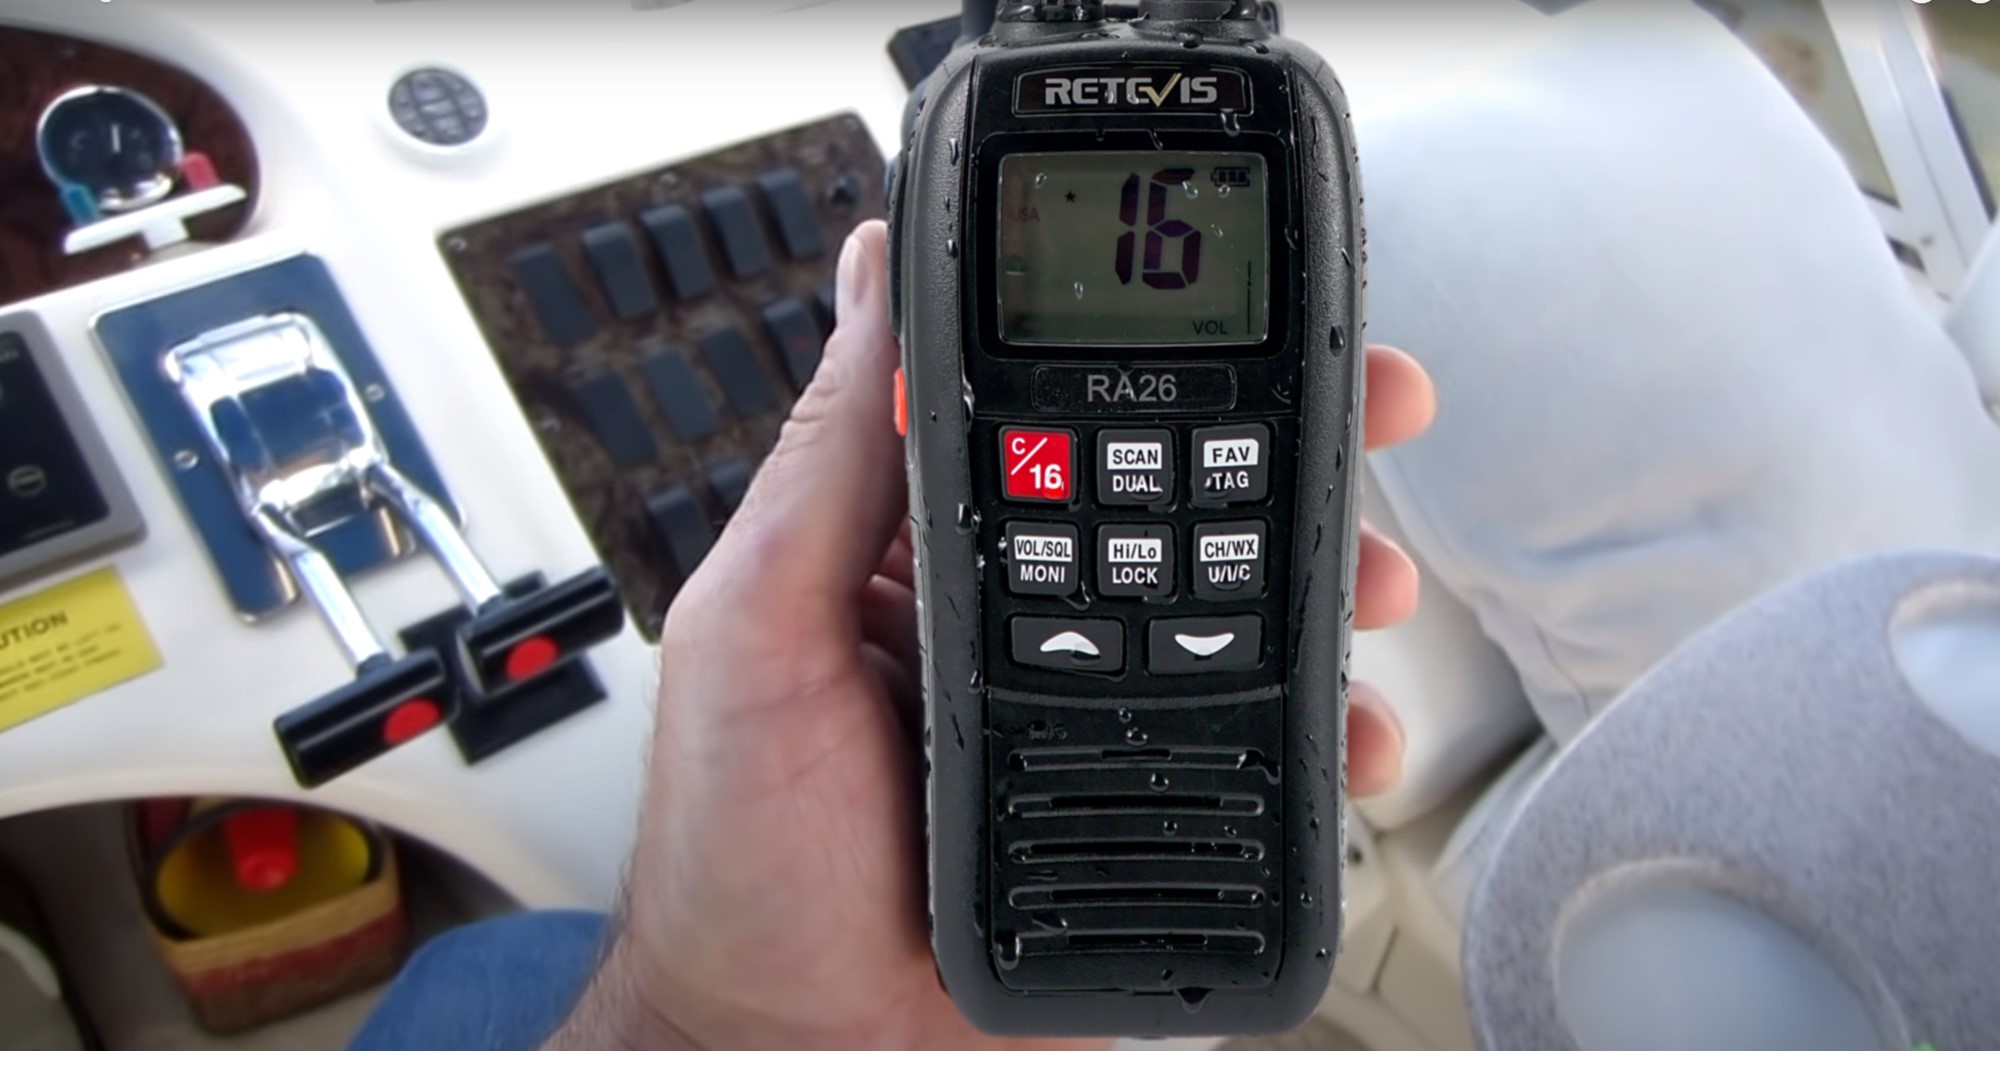 Common faults and solutions of VHF marine radio in daily use